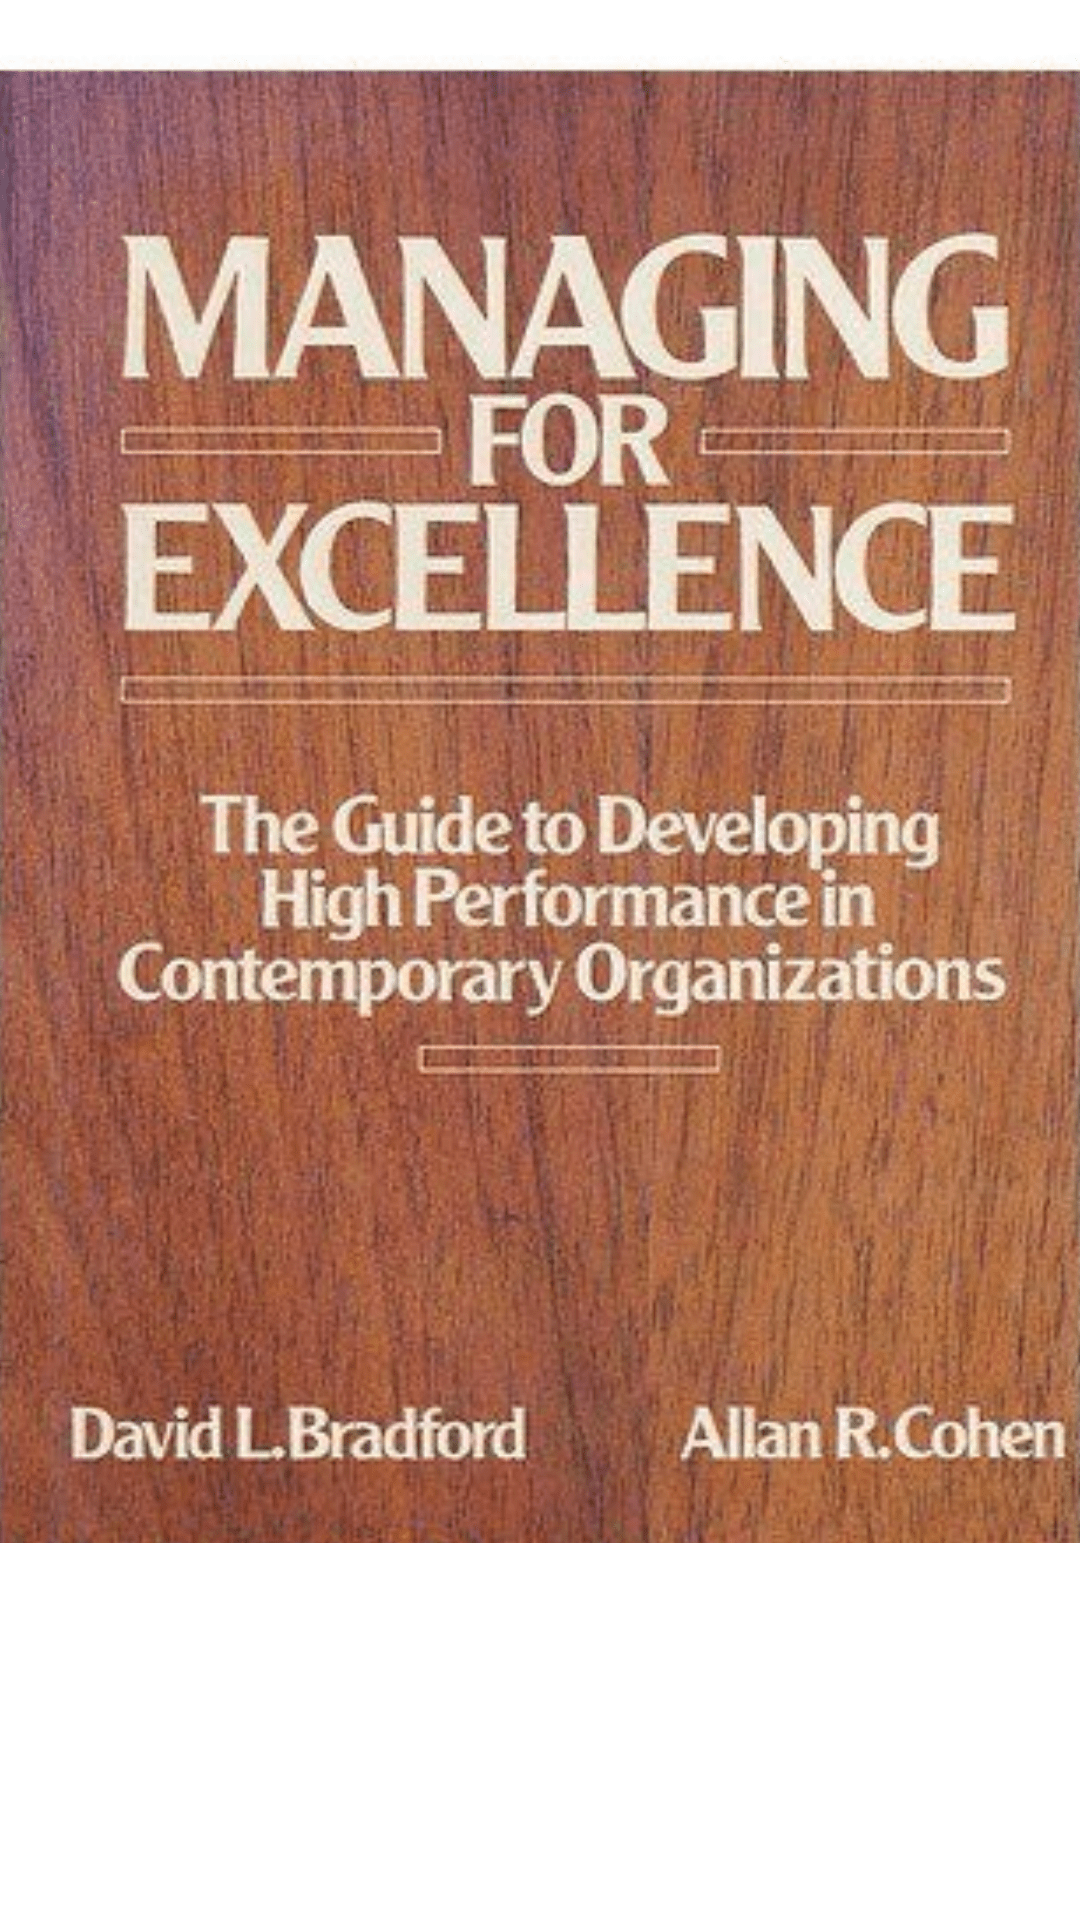 Managing for Excellence by David L. Bradford